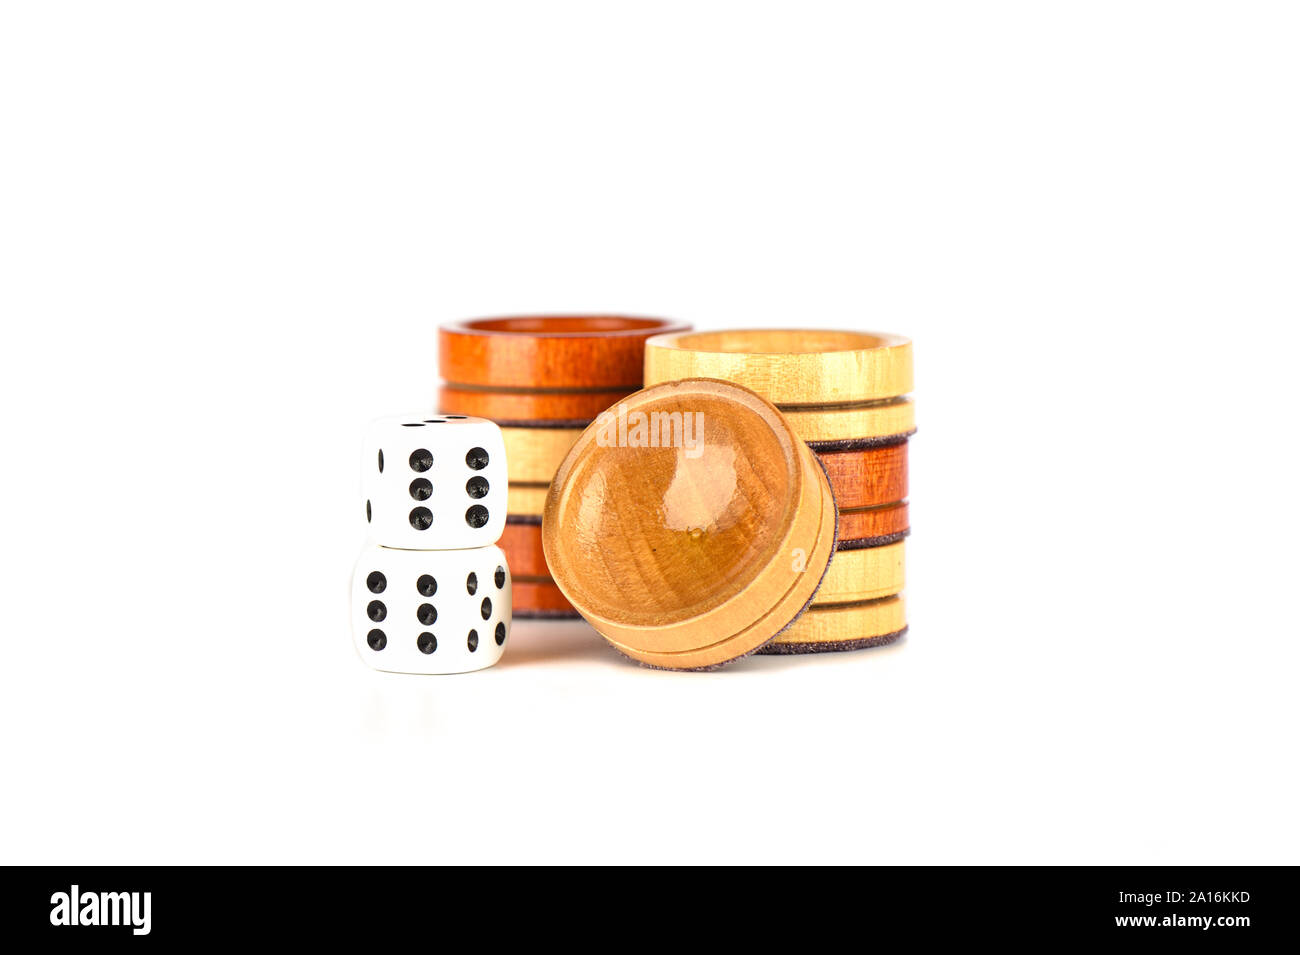 Dice and backgammon checkers isolated on a white background. Copy space. Stock Photo